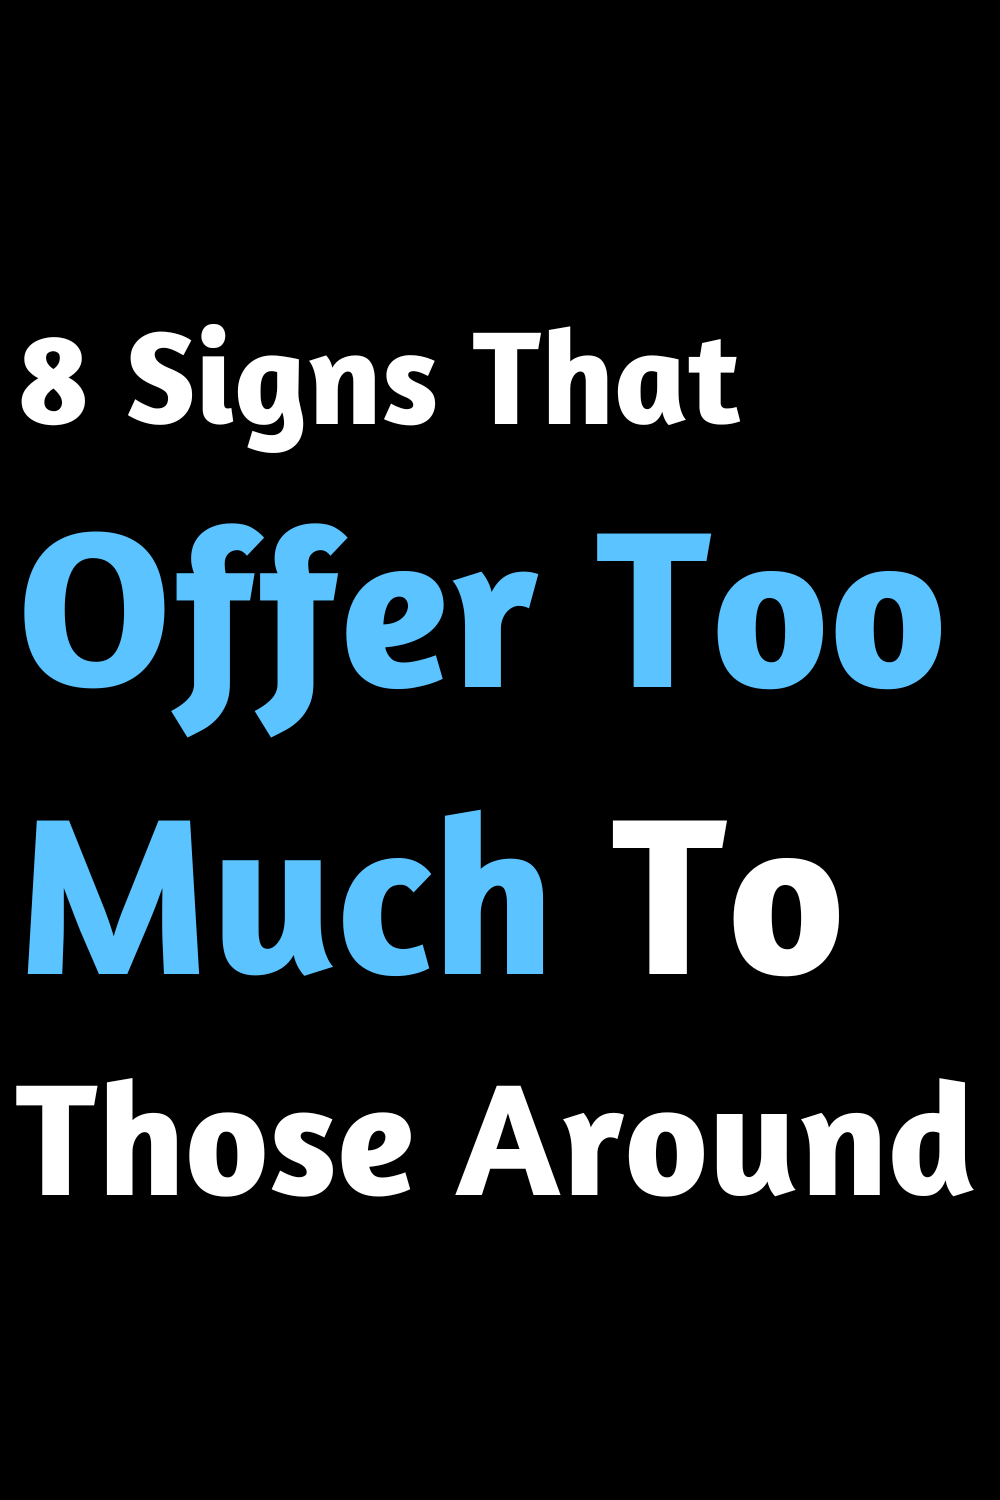 8 Signs That Offer Too Much To Those Around